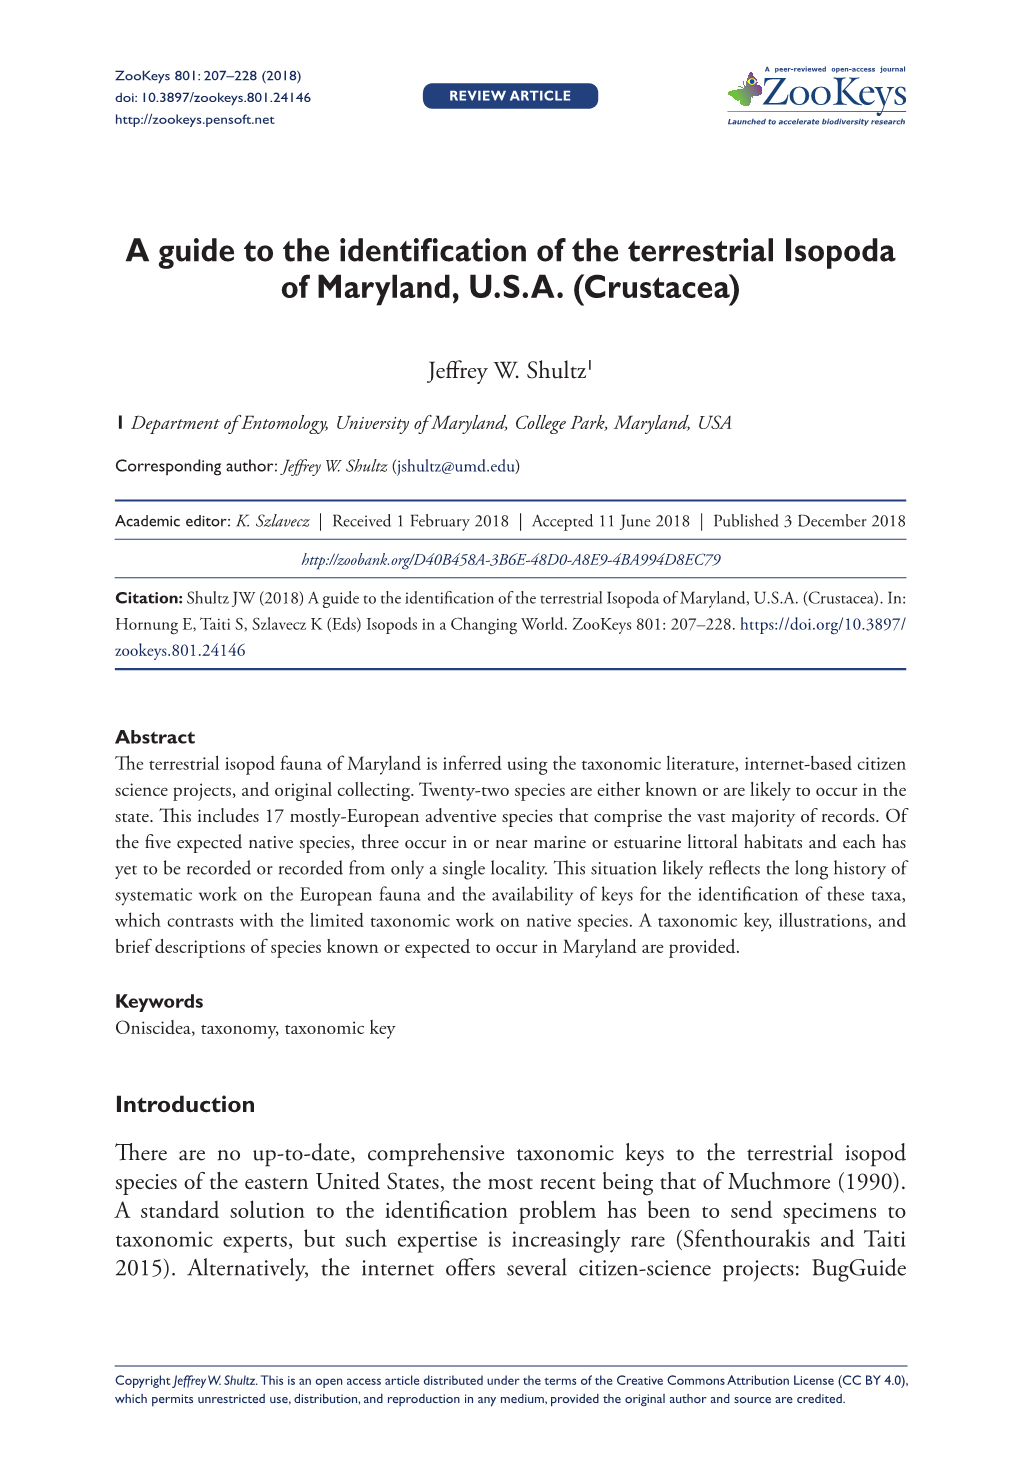 A Guide to the Identification of the Terrestrial Isopoda of Maryland, U.S.A. (Crustacea)